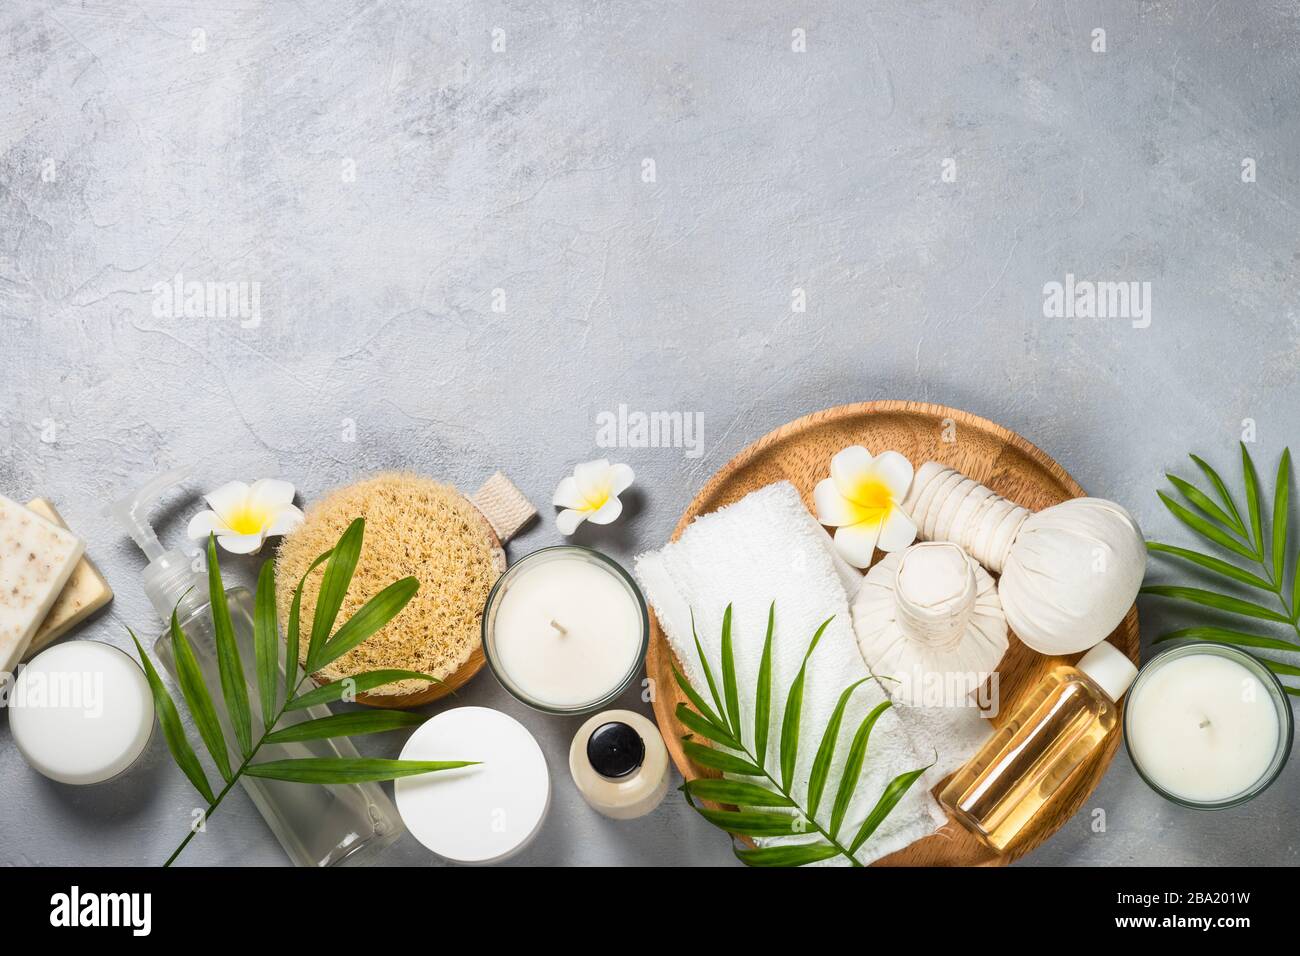 Spa product Flat lay background. Stock Photo